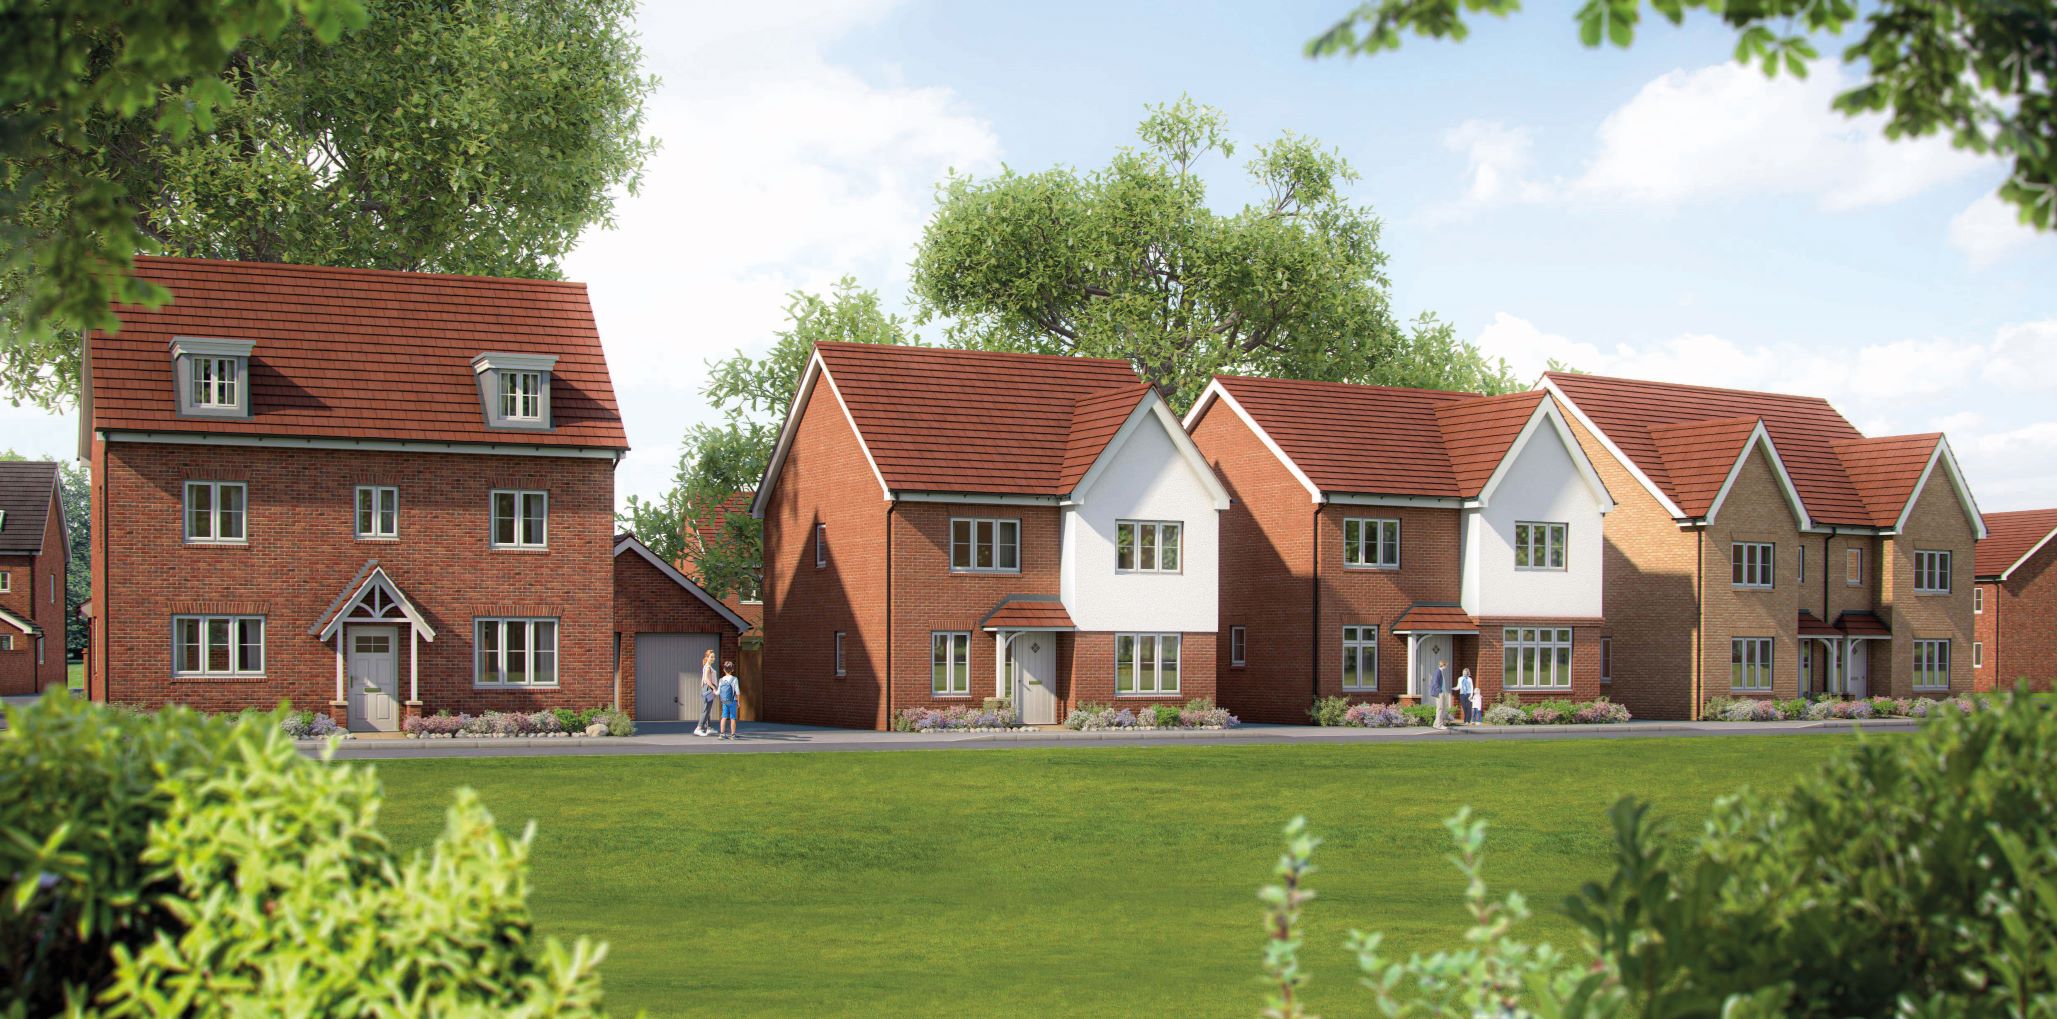 Bovis Homes Shinfield Meadows Nearly a quarter of new homes now built in final stages of development in Shinfield